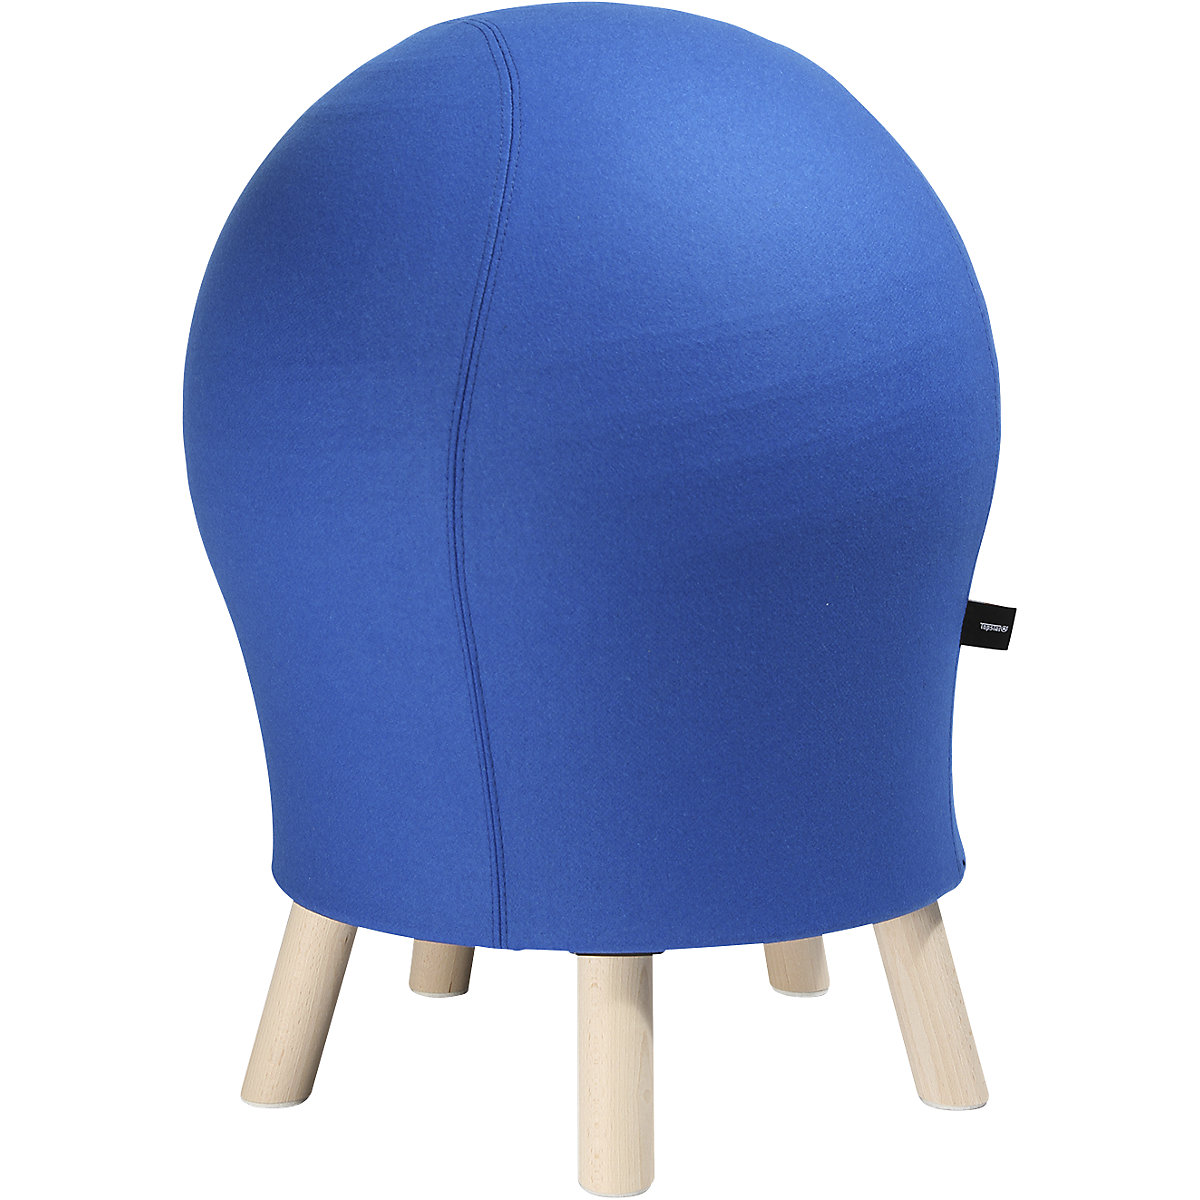 SITNESS 5 ALPINE fitness stool – Topstar, seat height approx. 620 mm, blue cover-8